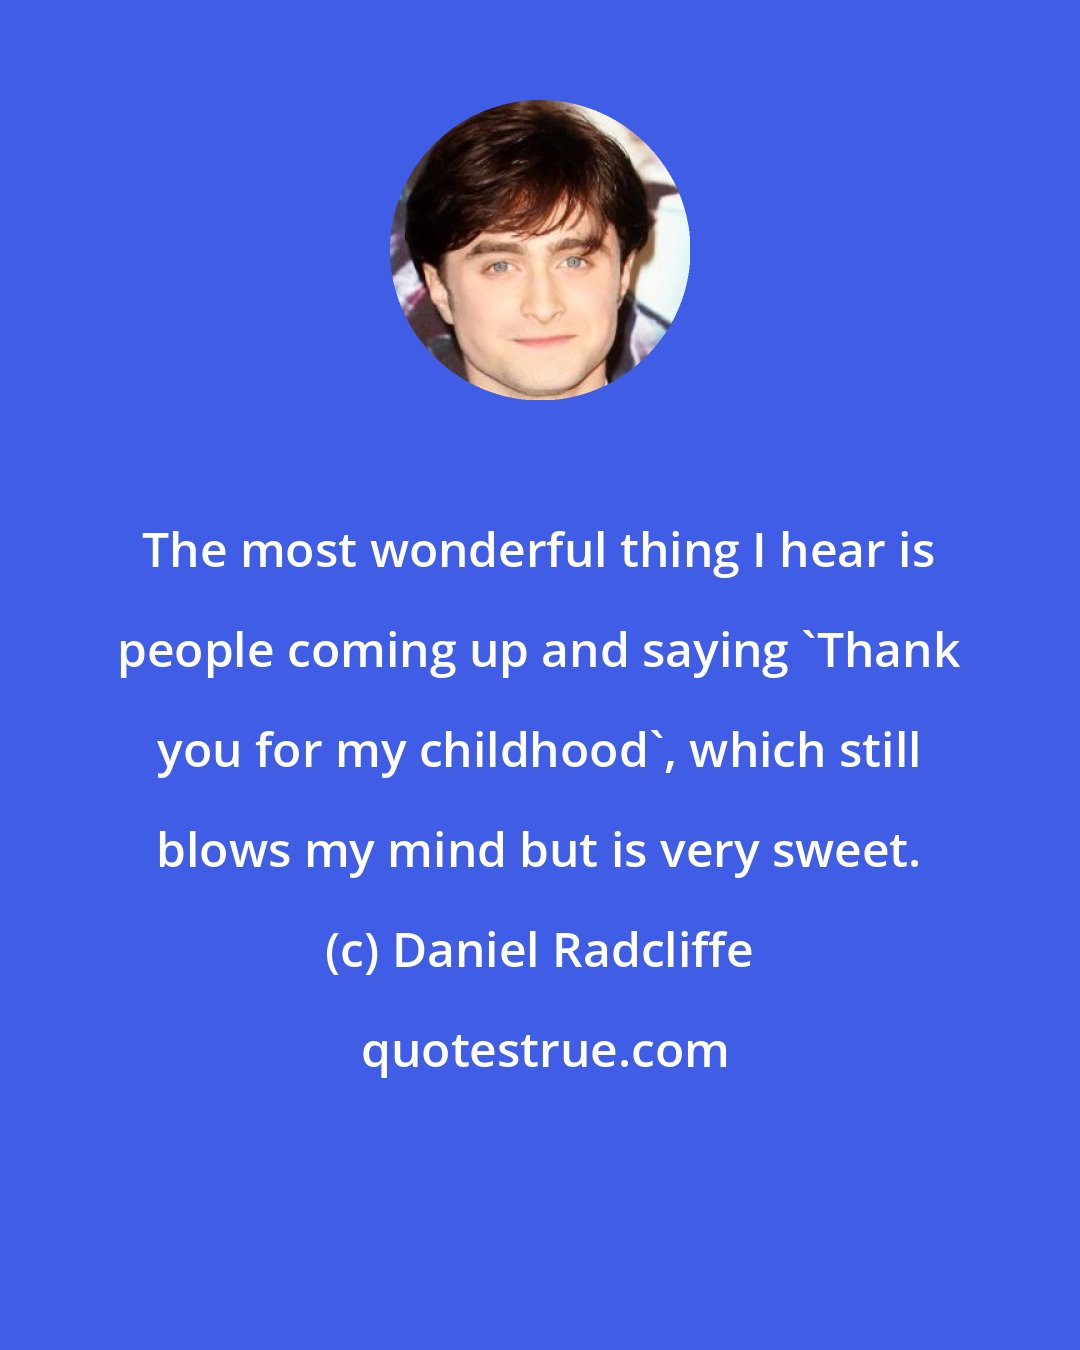 Daniel Radcliffe: The most wonderful thing I hear is people coming up and saying 'Thank you for my childhood', which still blows my mind but is very sweet.